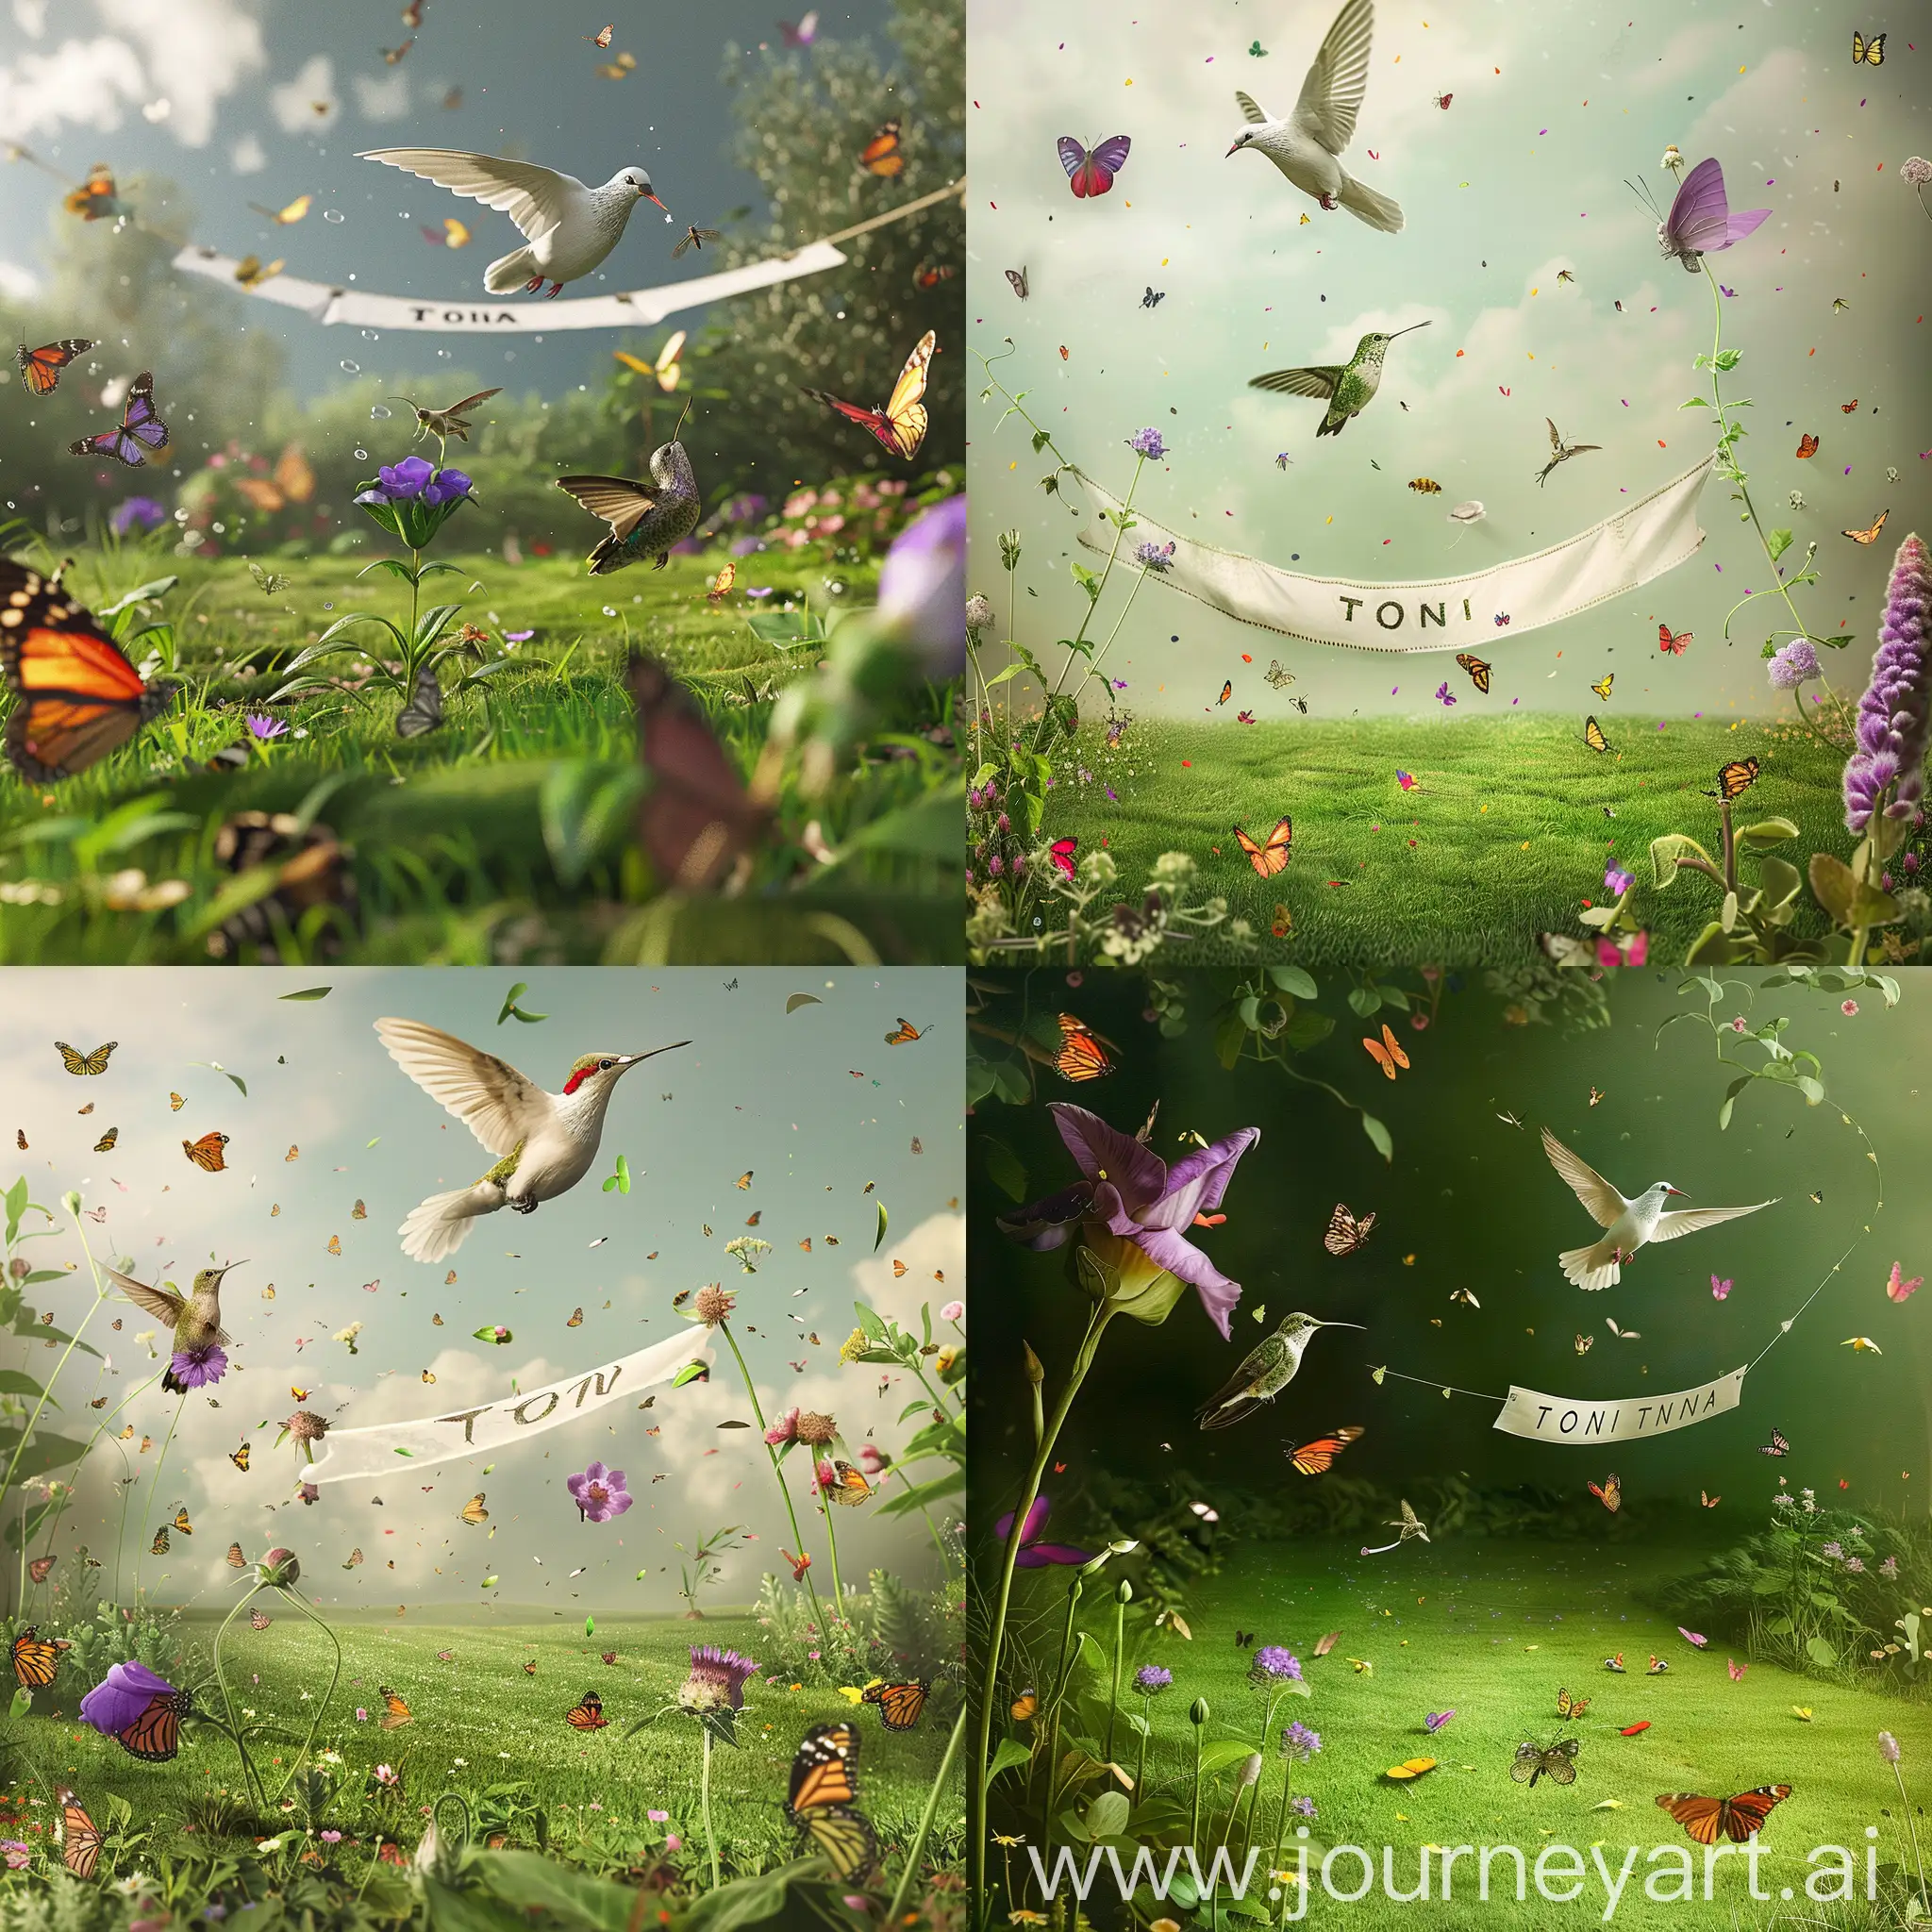 Create an photorealistic image of a lovely garden, showing green lawn, with tiny flitting butterflies, tiny bees and other colourful small insects. A small hummingbird is seen perched on a purple flower. In the  background, up in the air a dove flying across is dragging along a white banner on which is written the word TONIA.